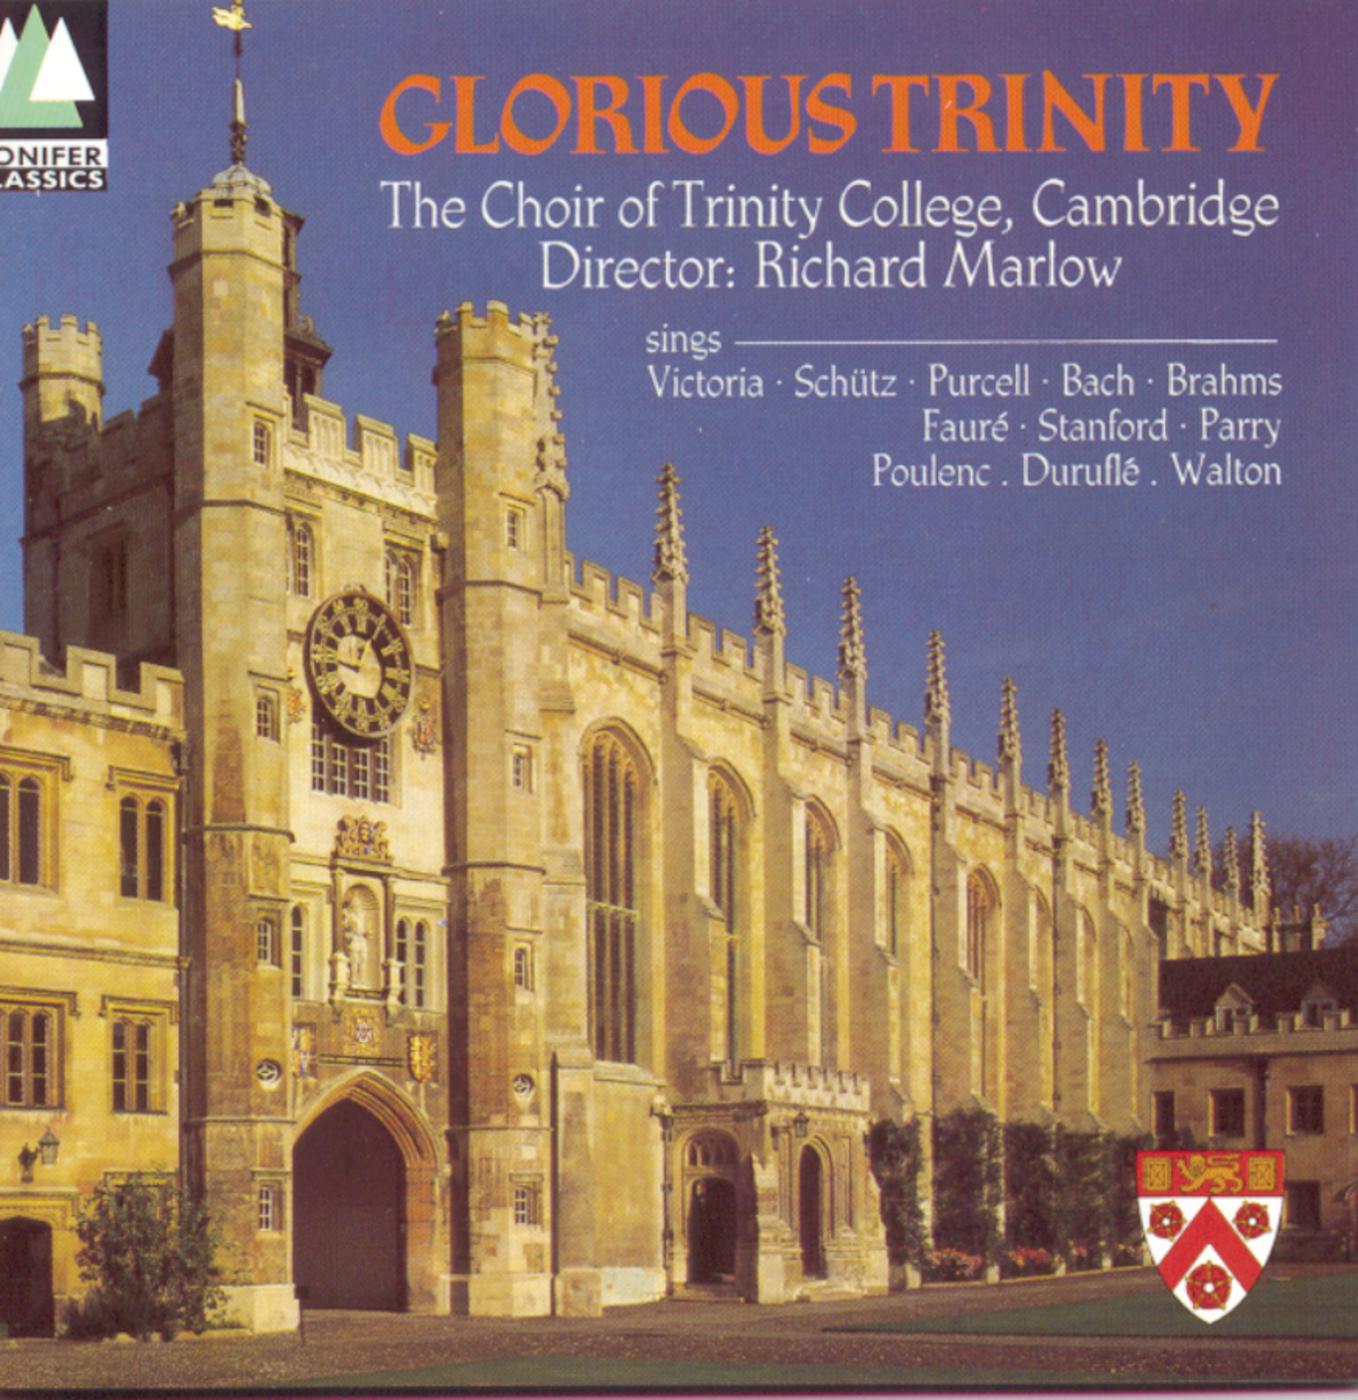 The Choir of Trinity College Cambridge - Eternal Father, Op. 135